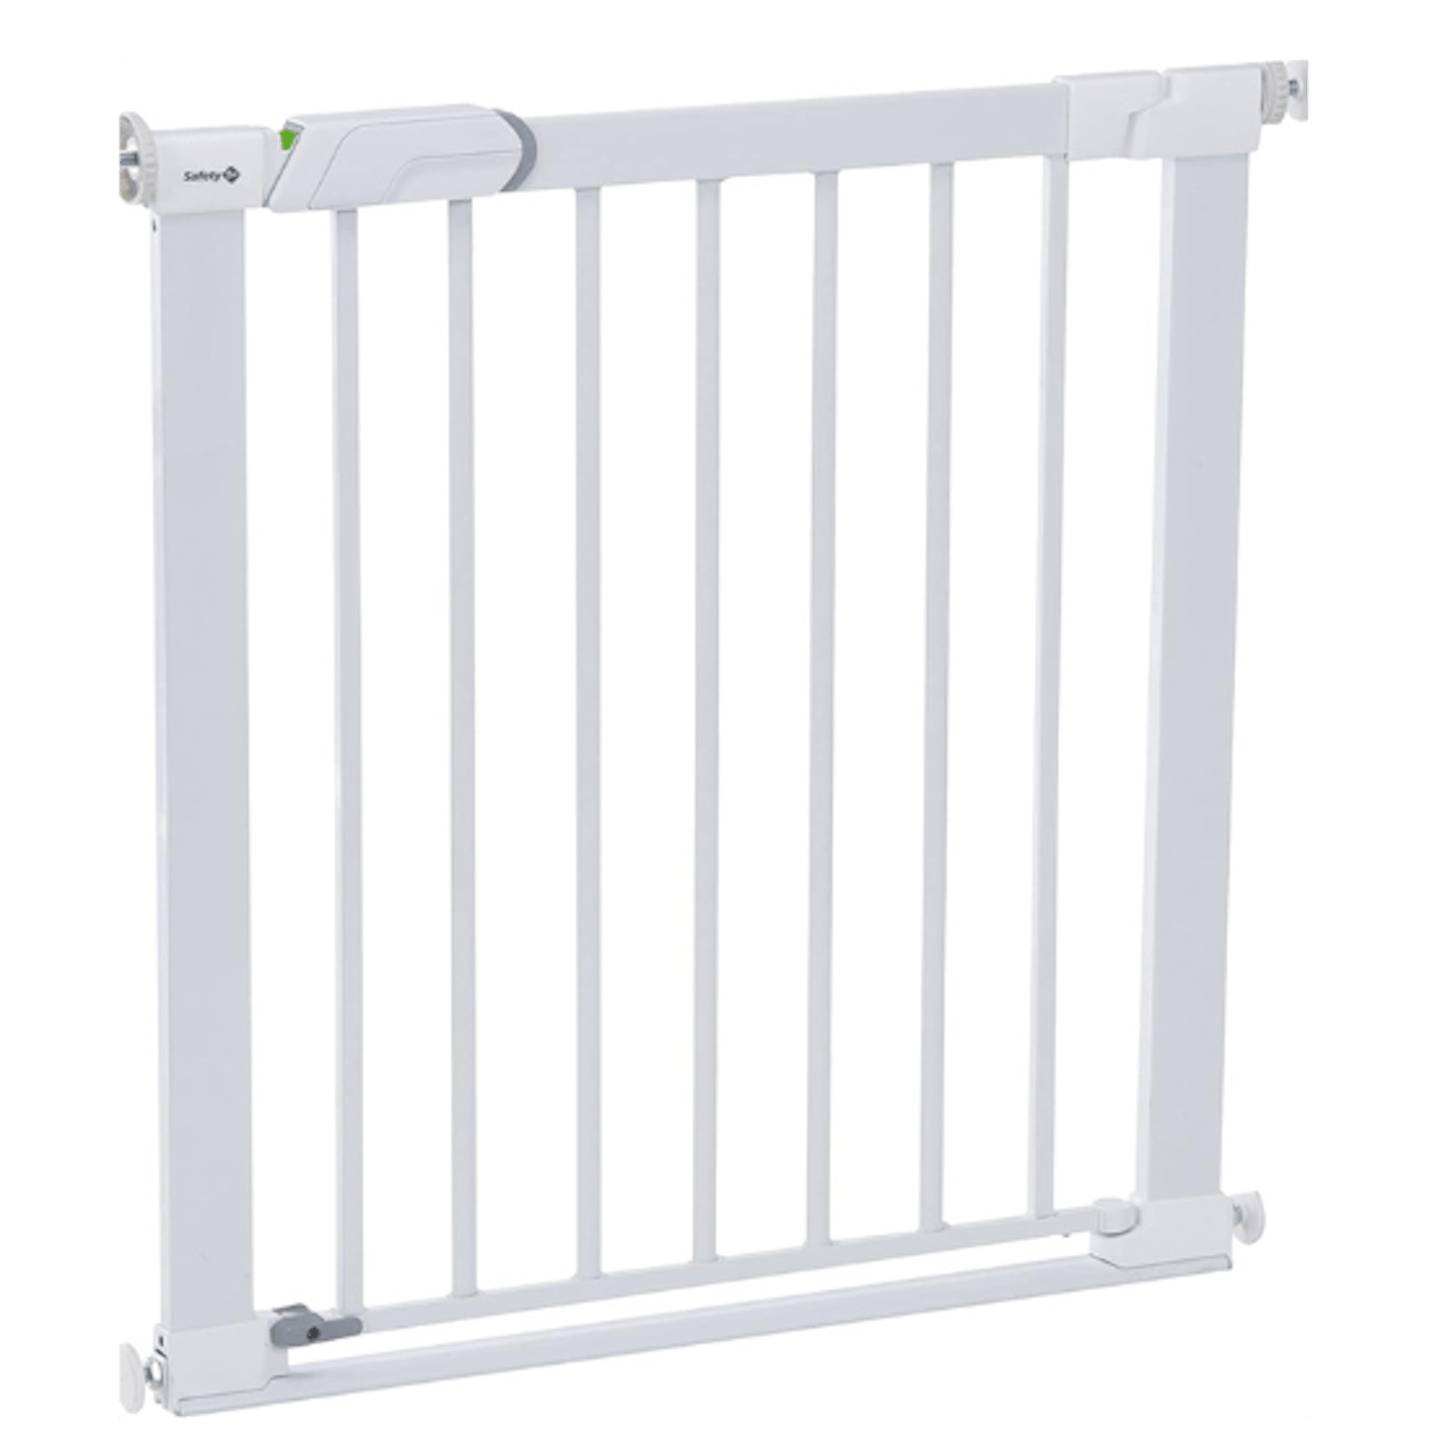 Black Friday baby deals stair gate